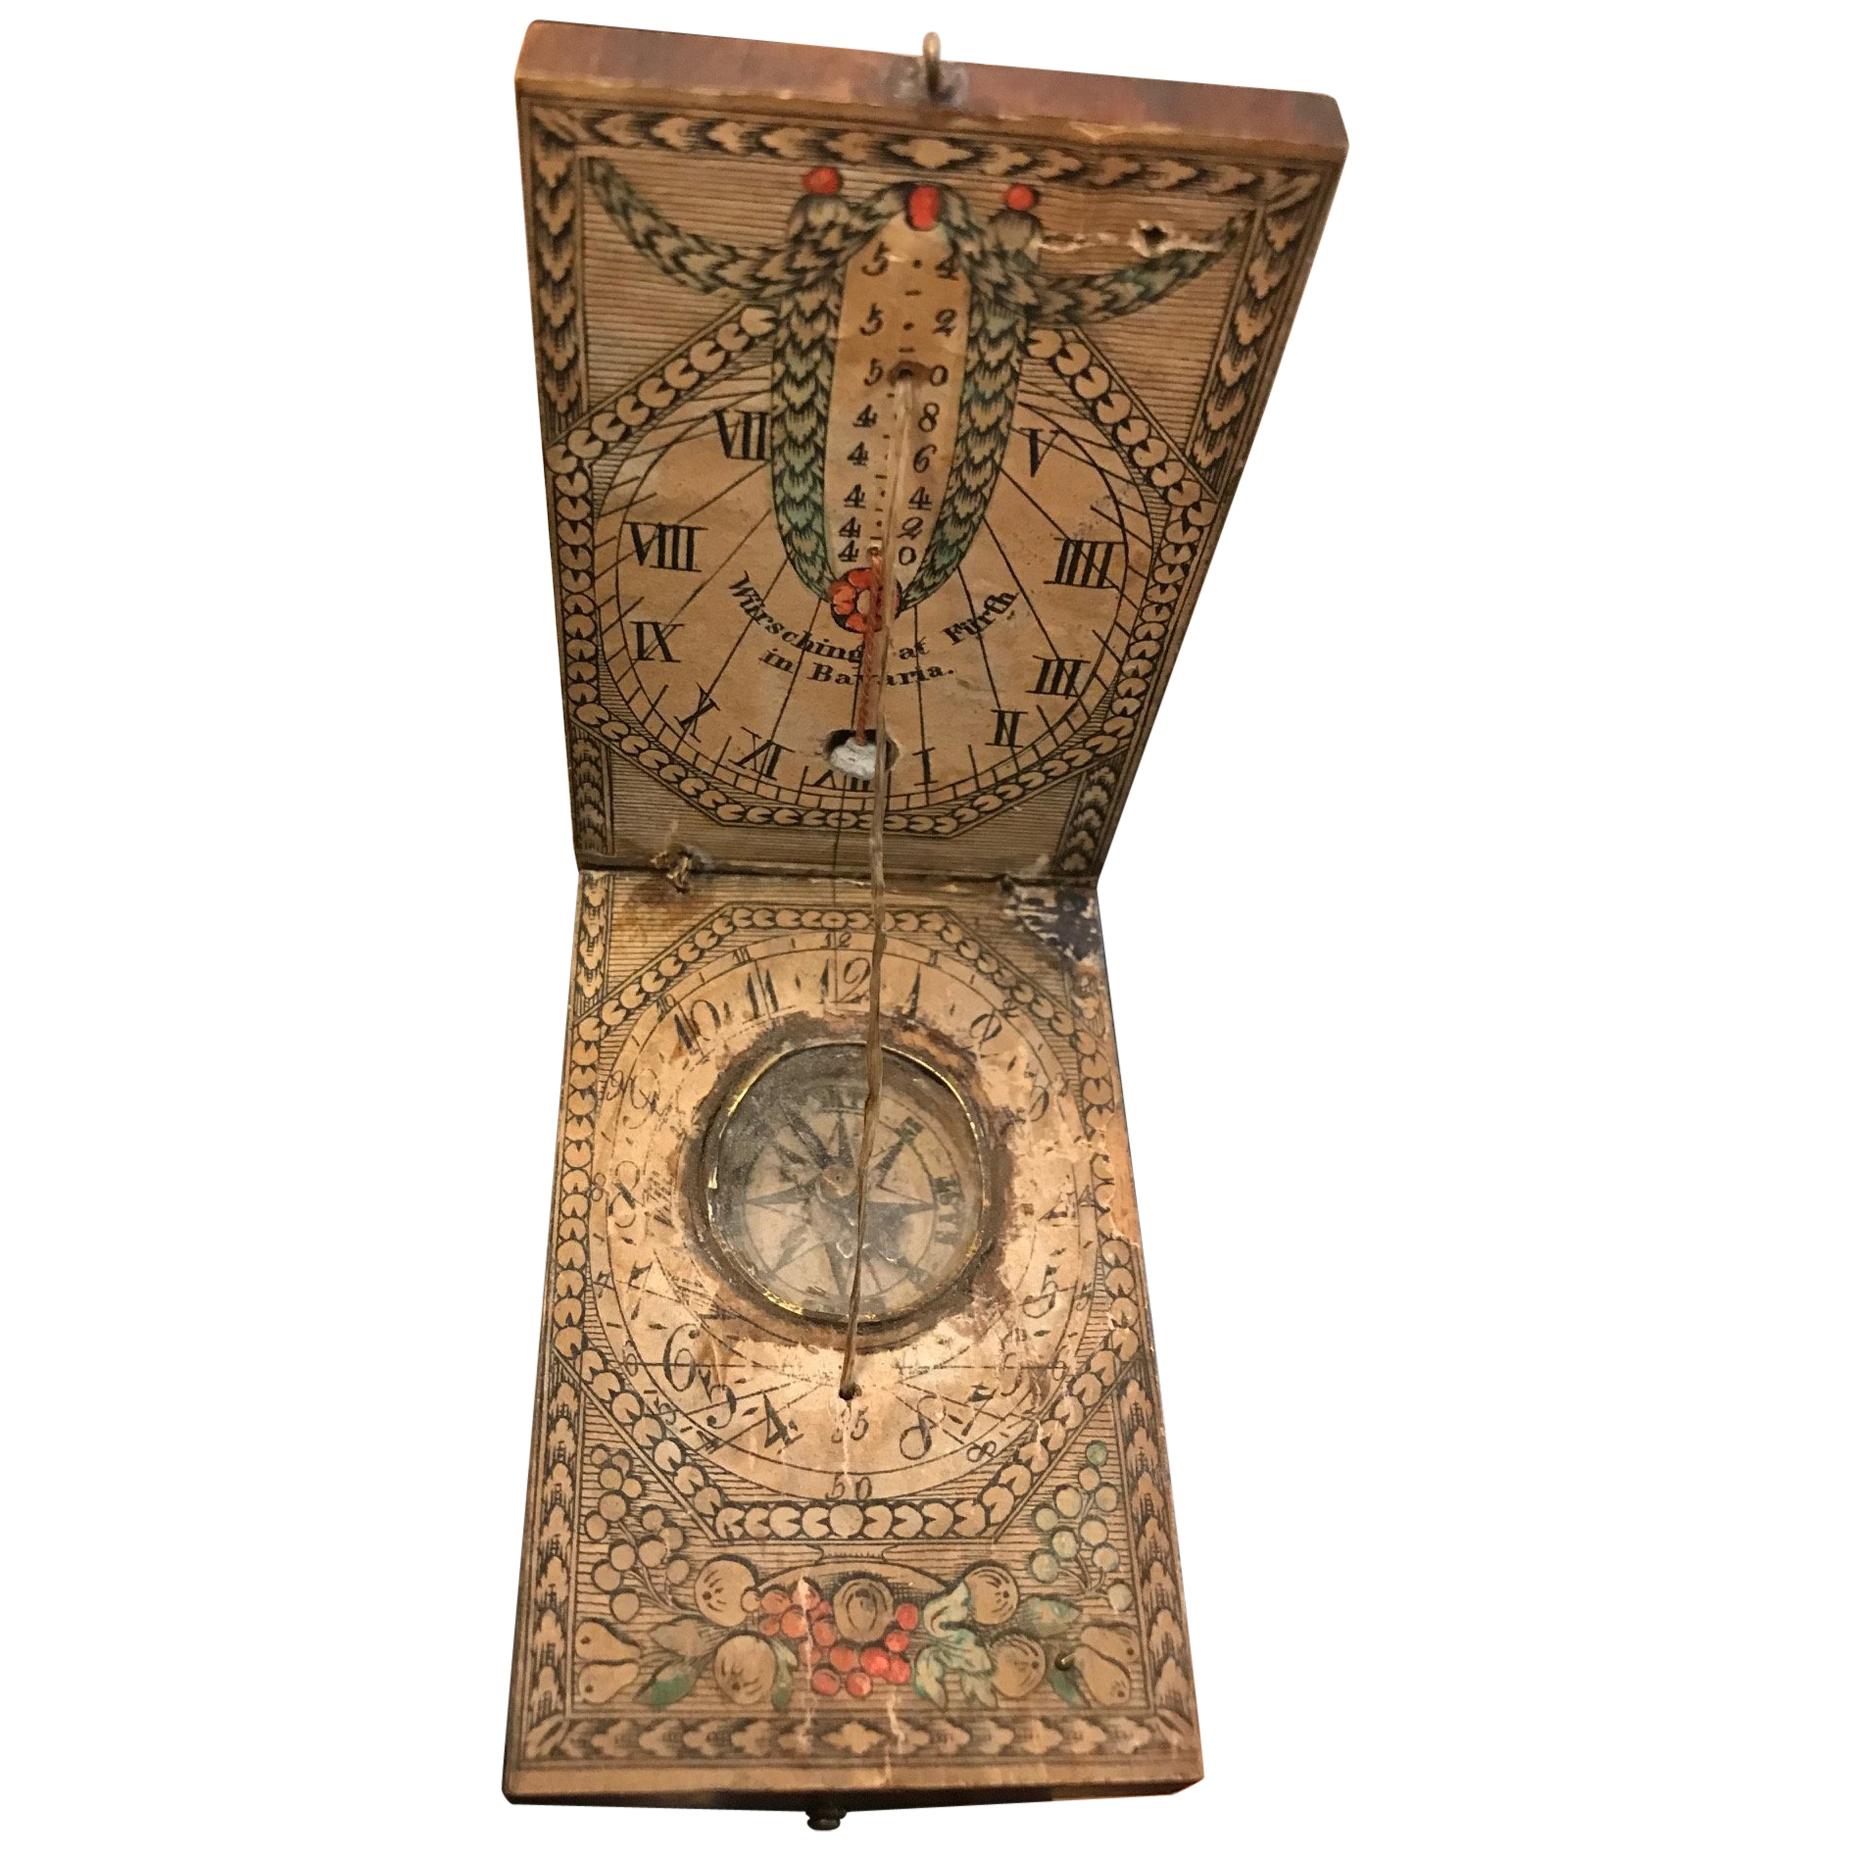 German Portable Wooden Sundial with Compass, circa 1830-1850 For Sale